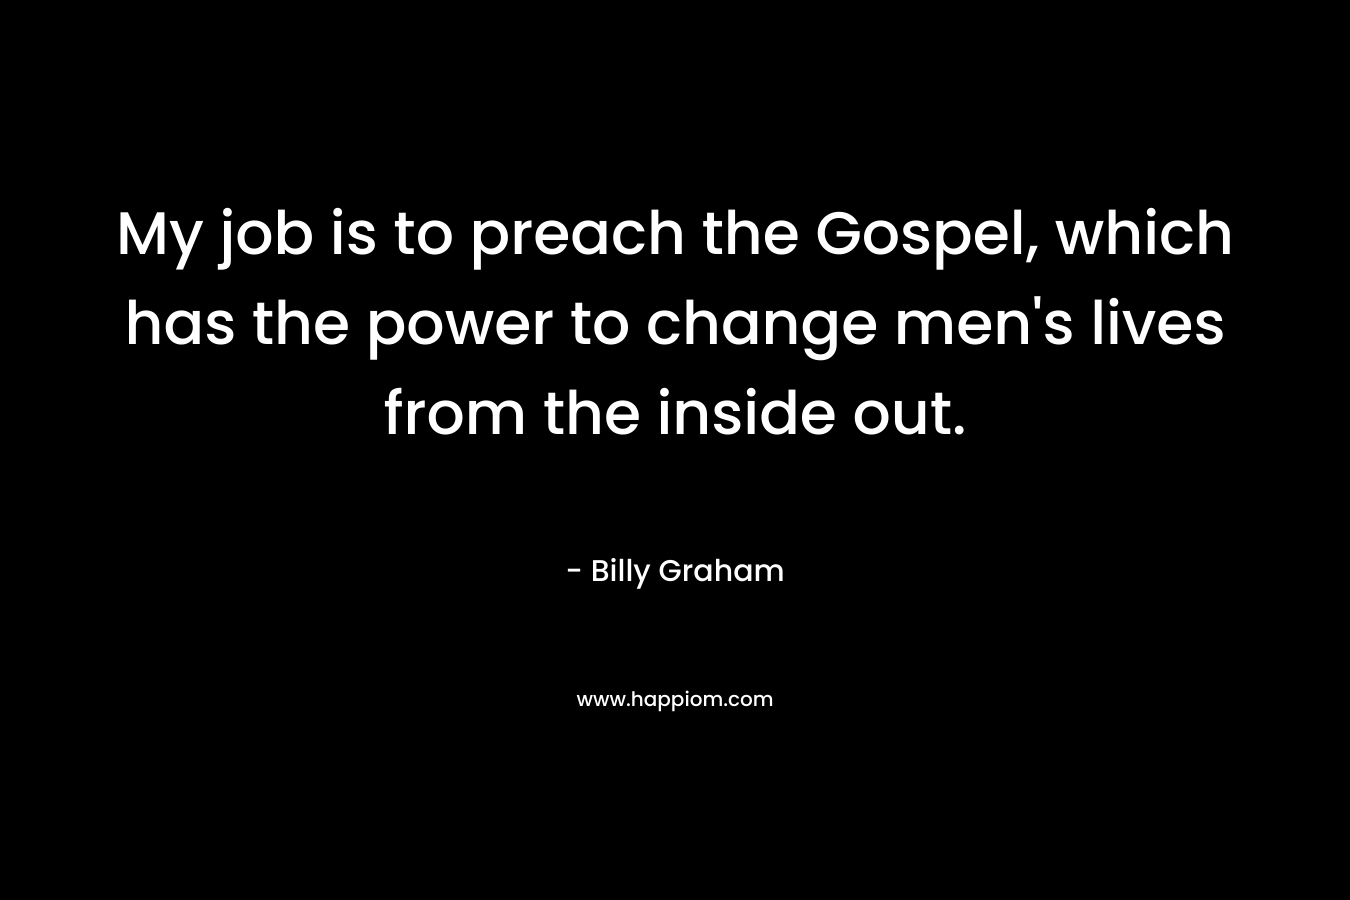 My job is to preach the Gospel, which has the power to change men’s lives from the inside out. – Billy Graham